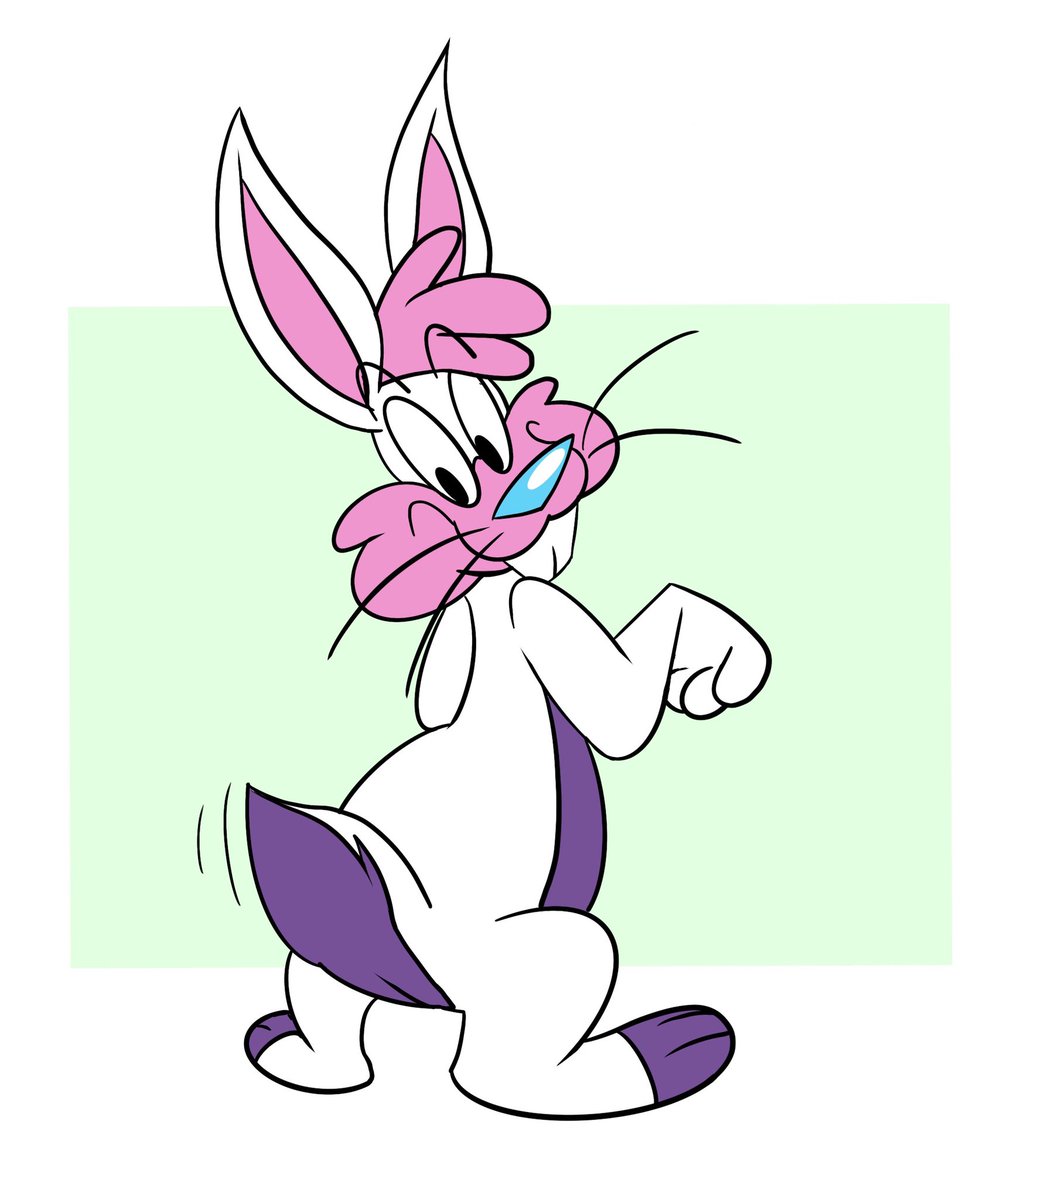 Happy #InternationalRabbitDay!!! 

Mauve would probably be more enthusiastic about being a bunny if his skunk tail was still intact :P